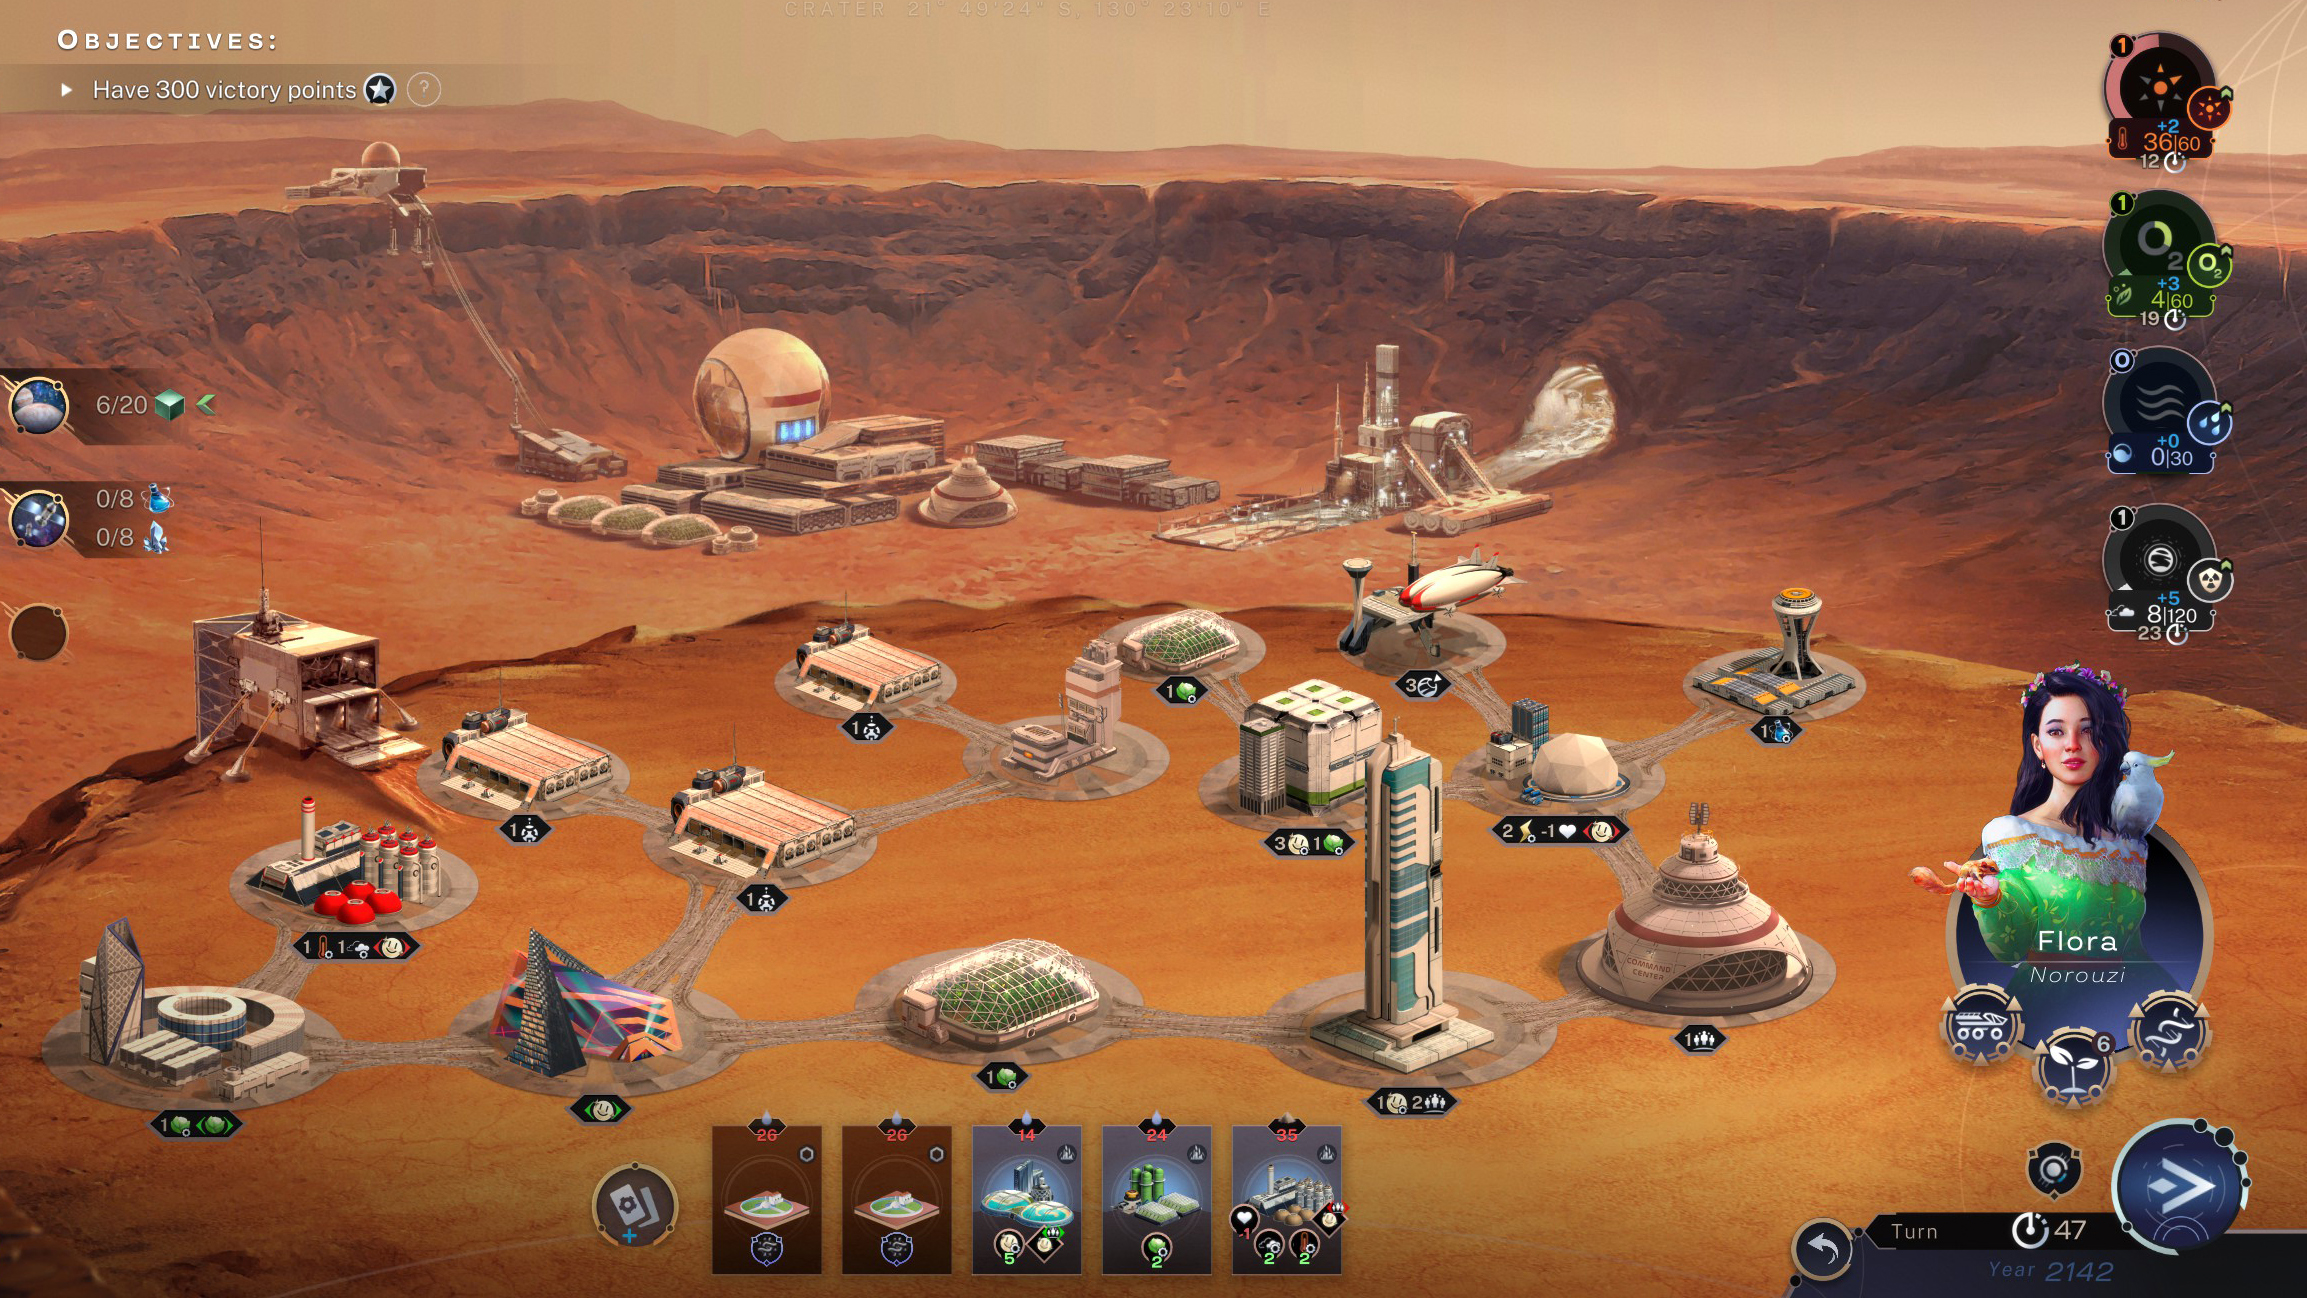  Why I failed to terraform Mars: too many space hotels, not enough cabbage 